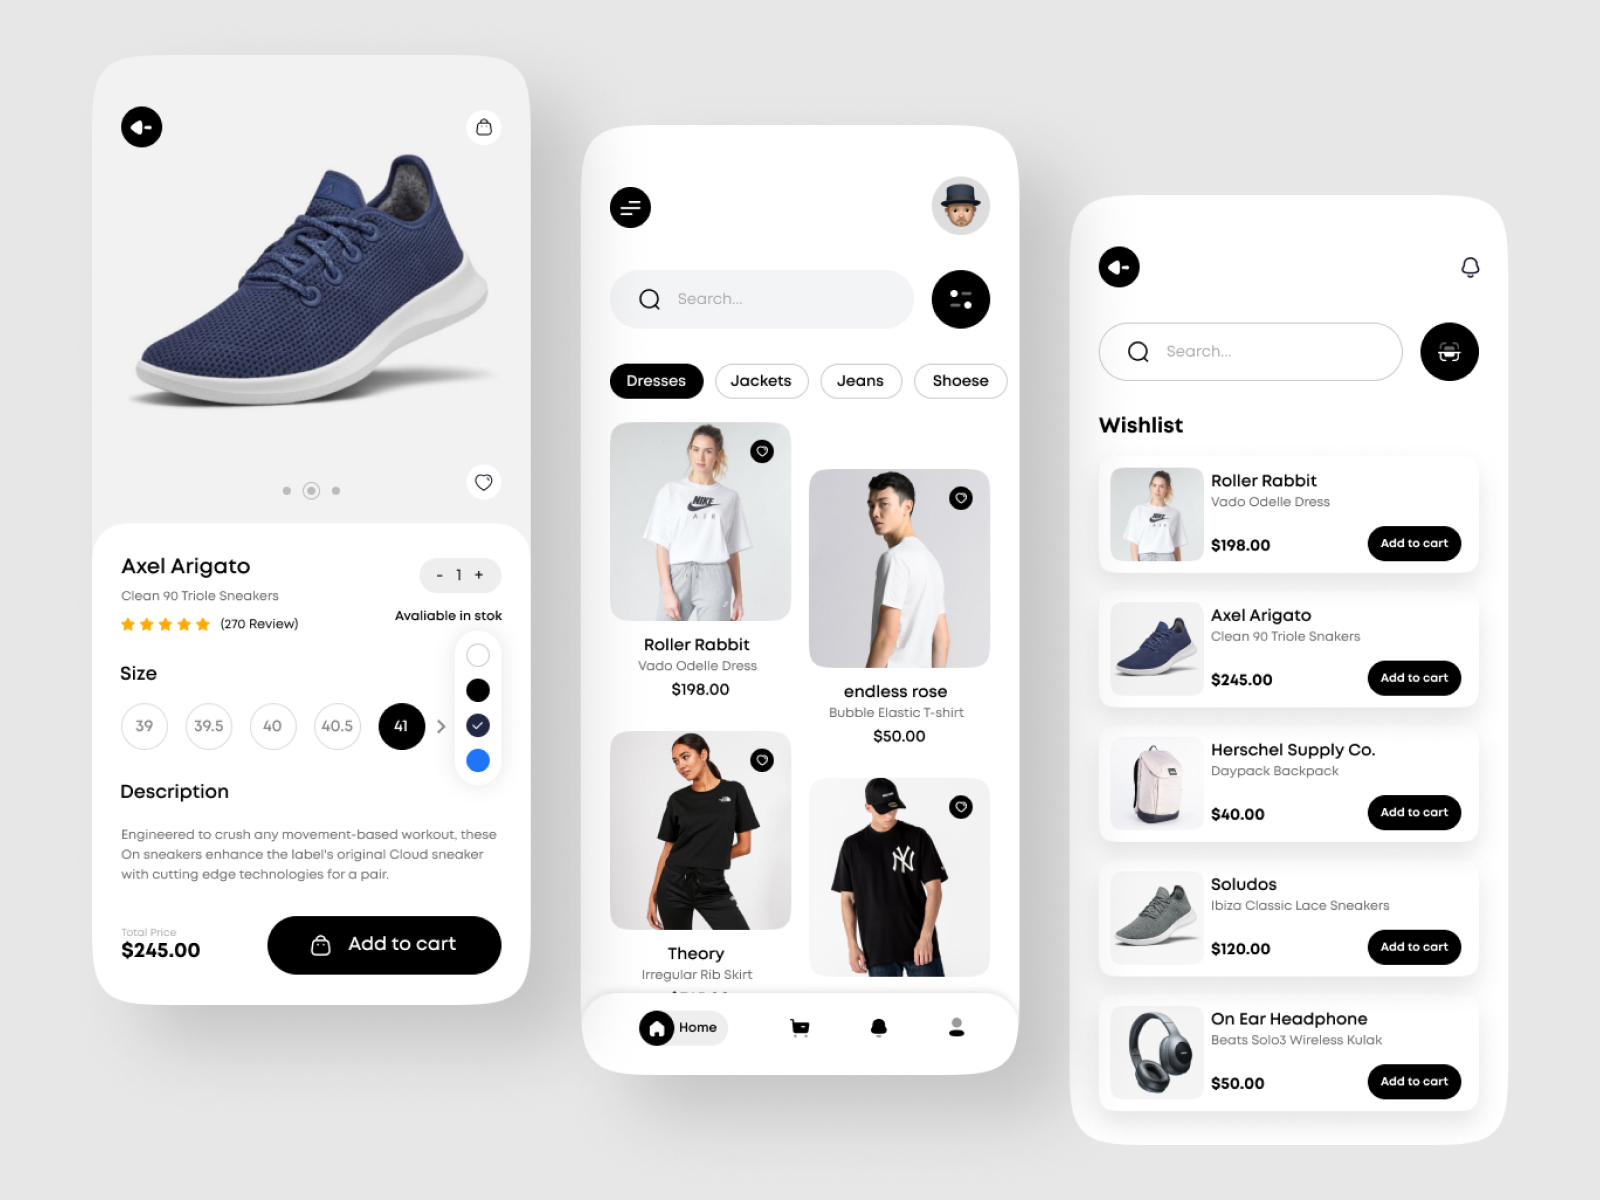 Rika - eCommerce Mobile App by Hasan Mahmud on Dribbble